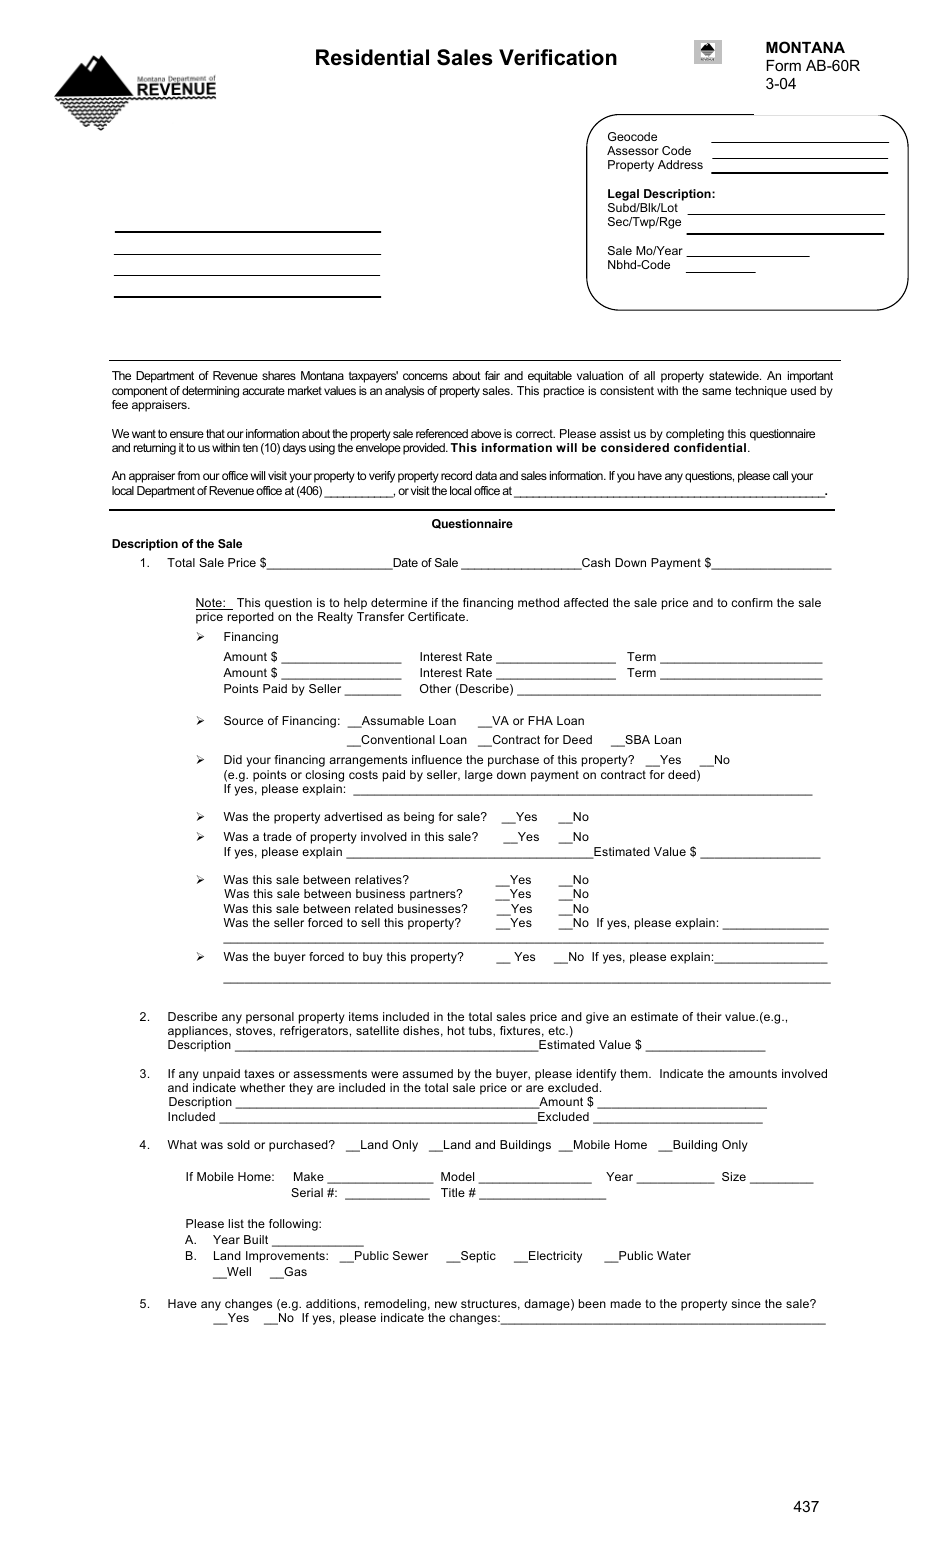 Form AB-60r Residential Sales Verification Form - Montana, Page 1